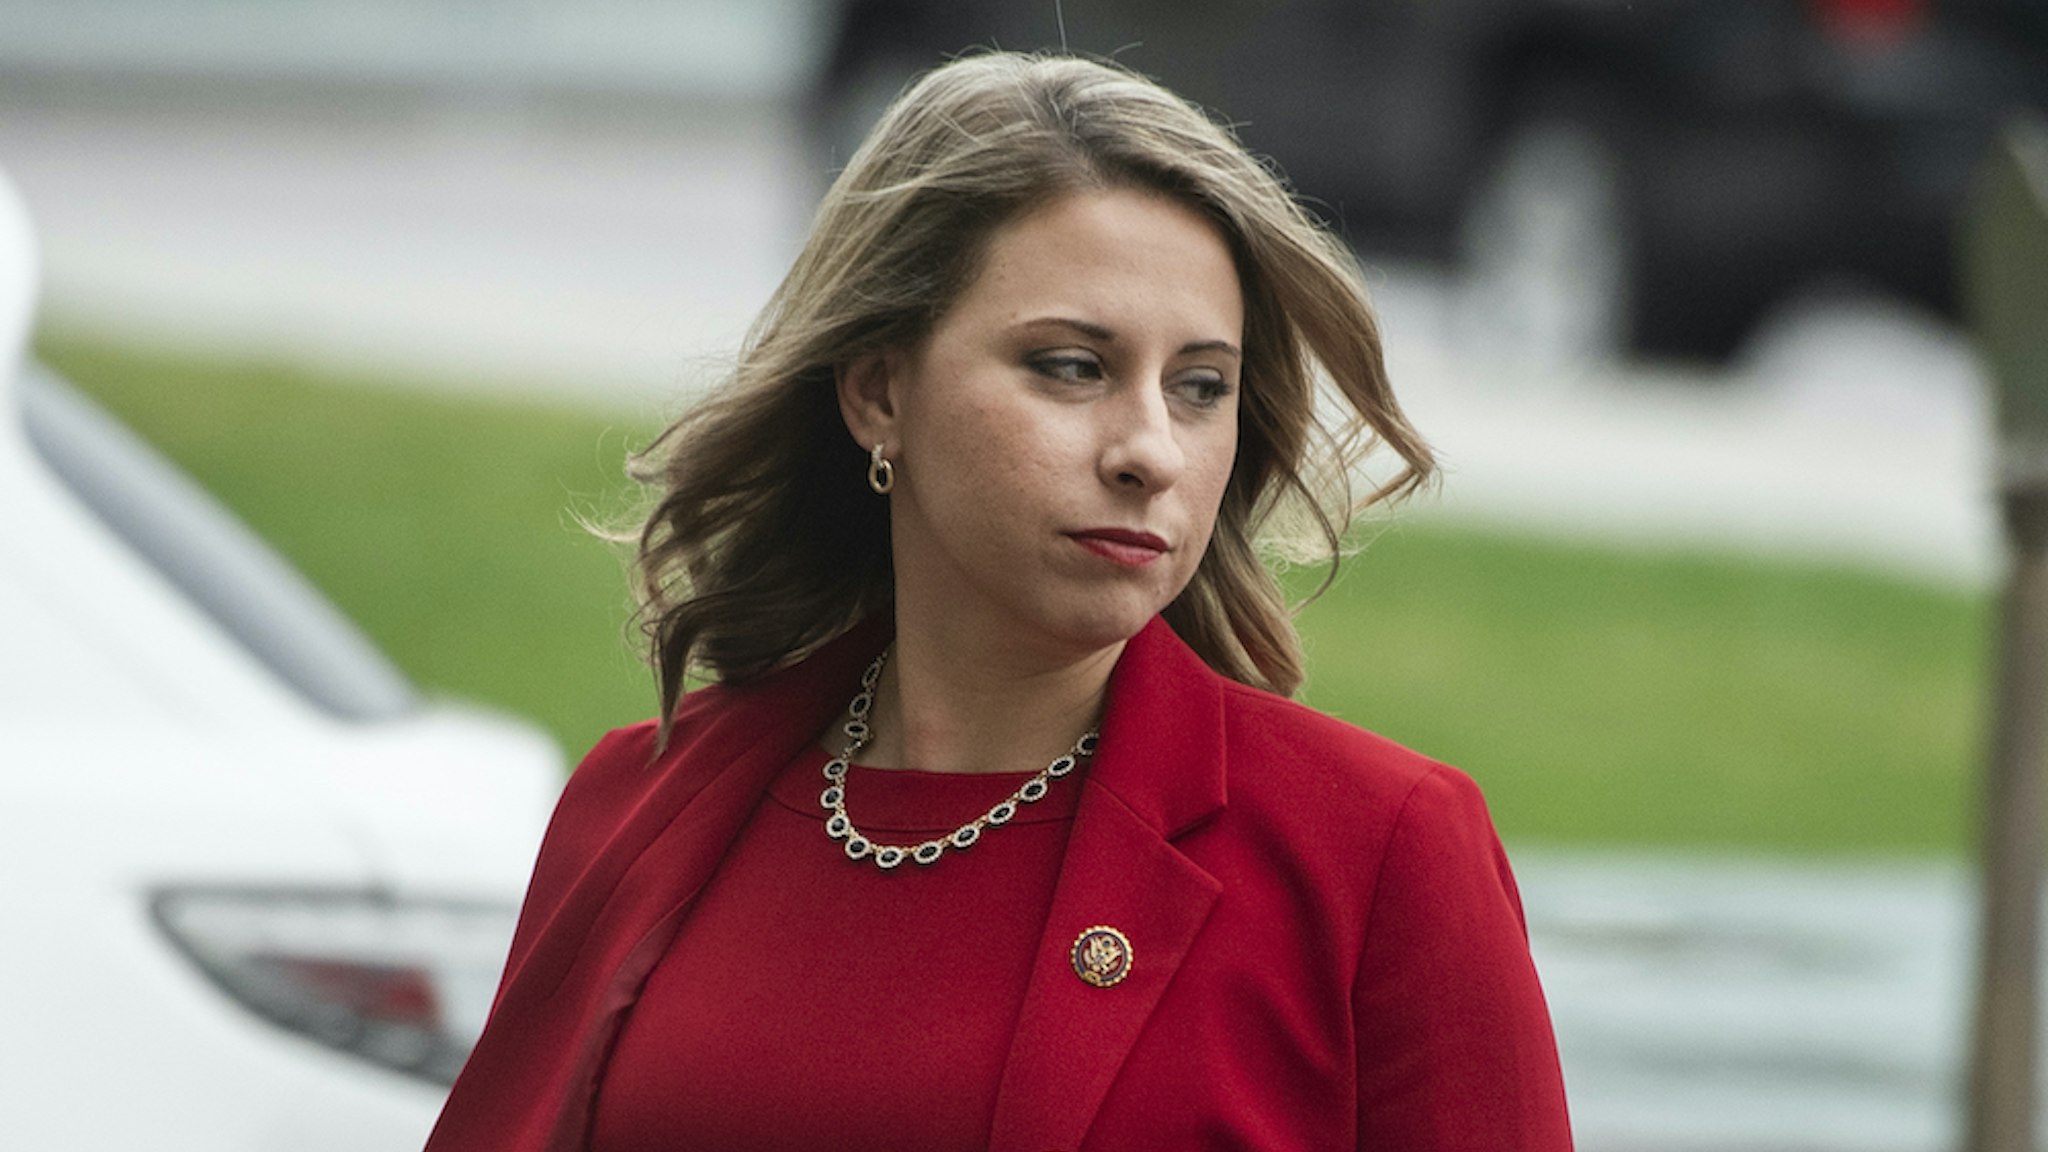 Rep. Katie Hill, D-Calif., arrives to the Capitol for a House vote on a impeachment inquiry resolution on Thursday, October 31, 2019. This was Hill’s last series of votes before her resignation, for having an improper relationship with an aide, becomes effective. (Photo By Tom Williams/CQ Roll Call)